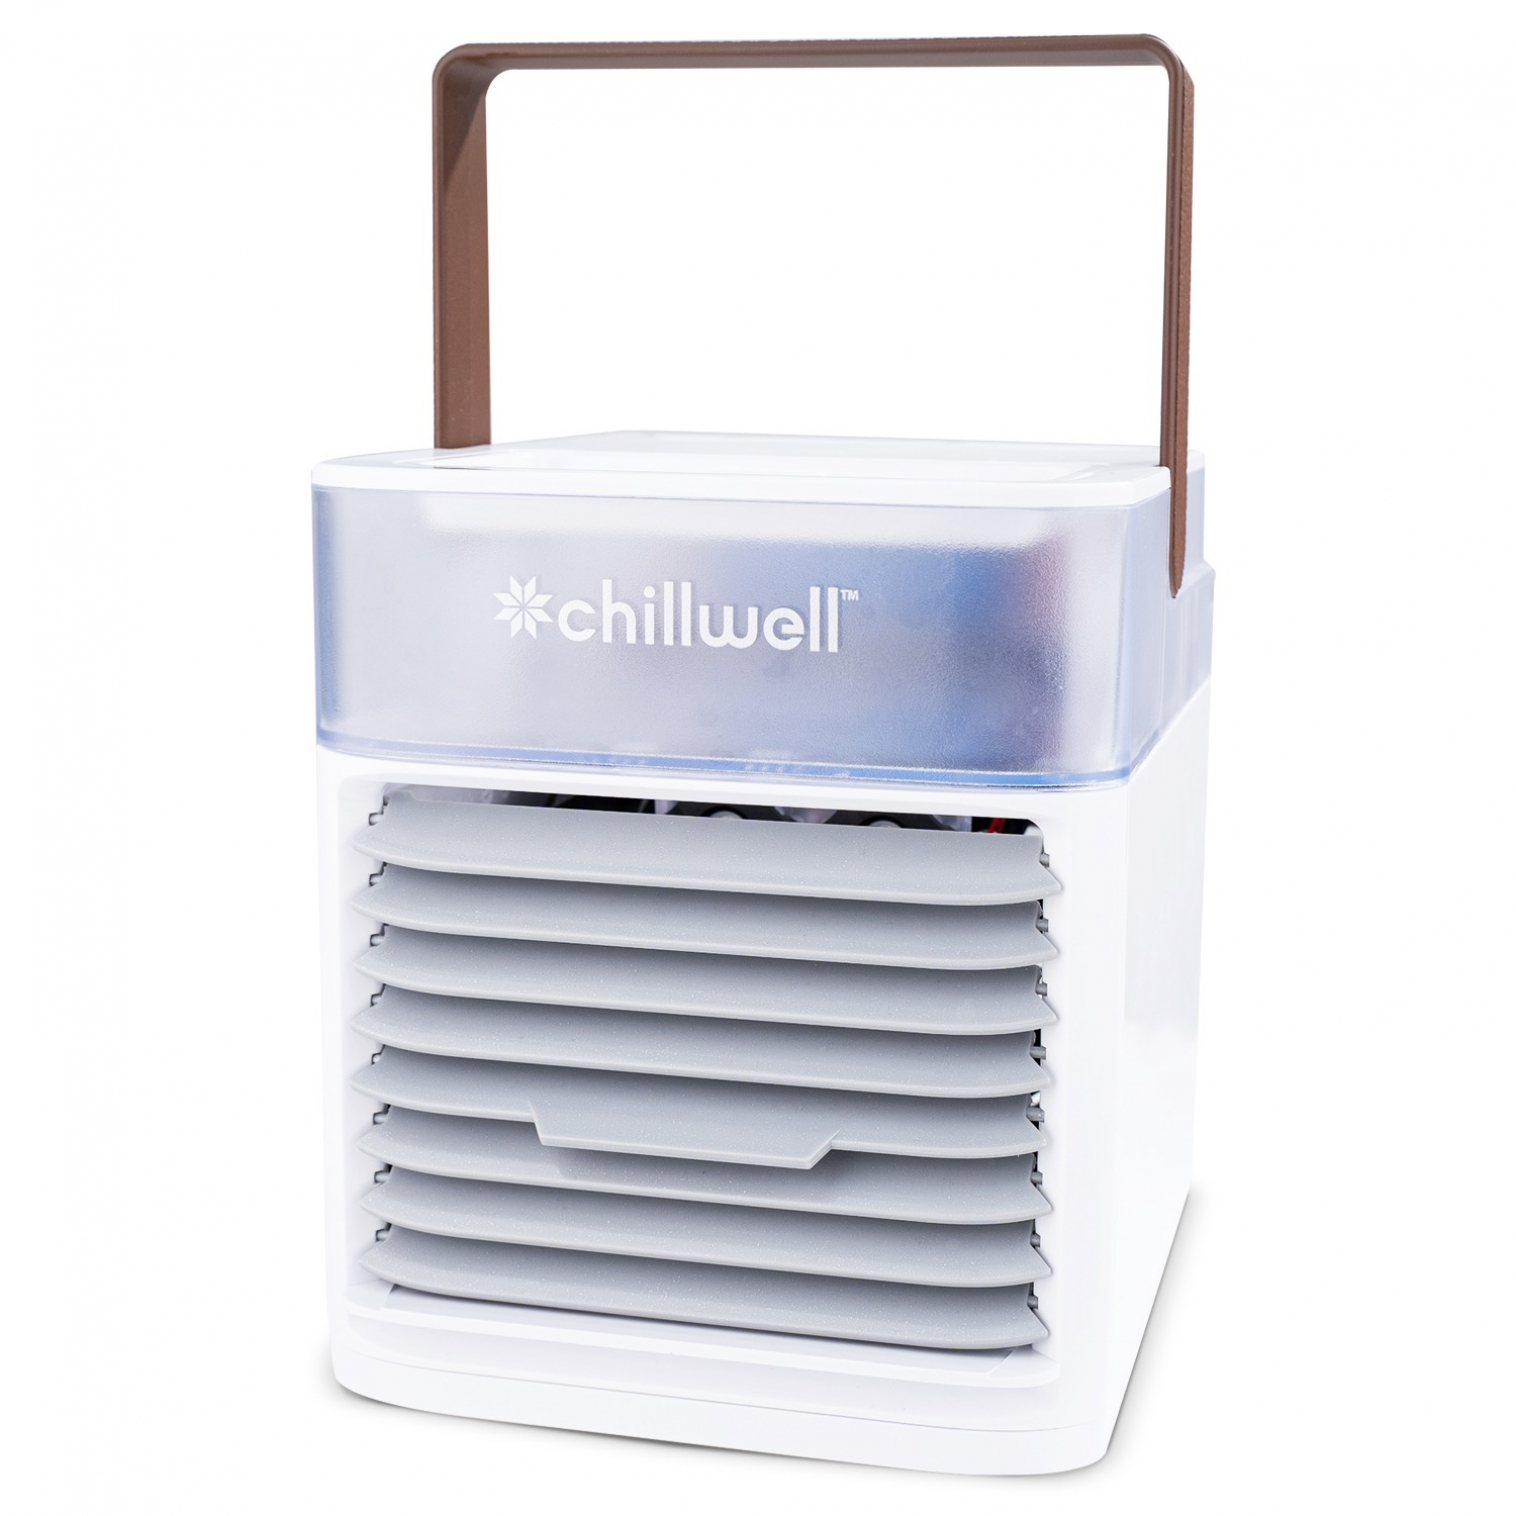 Chillwell AC Evaporative Cooler Reviews